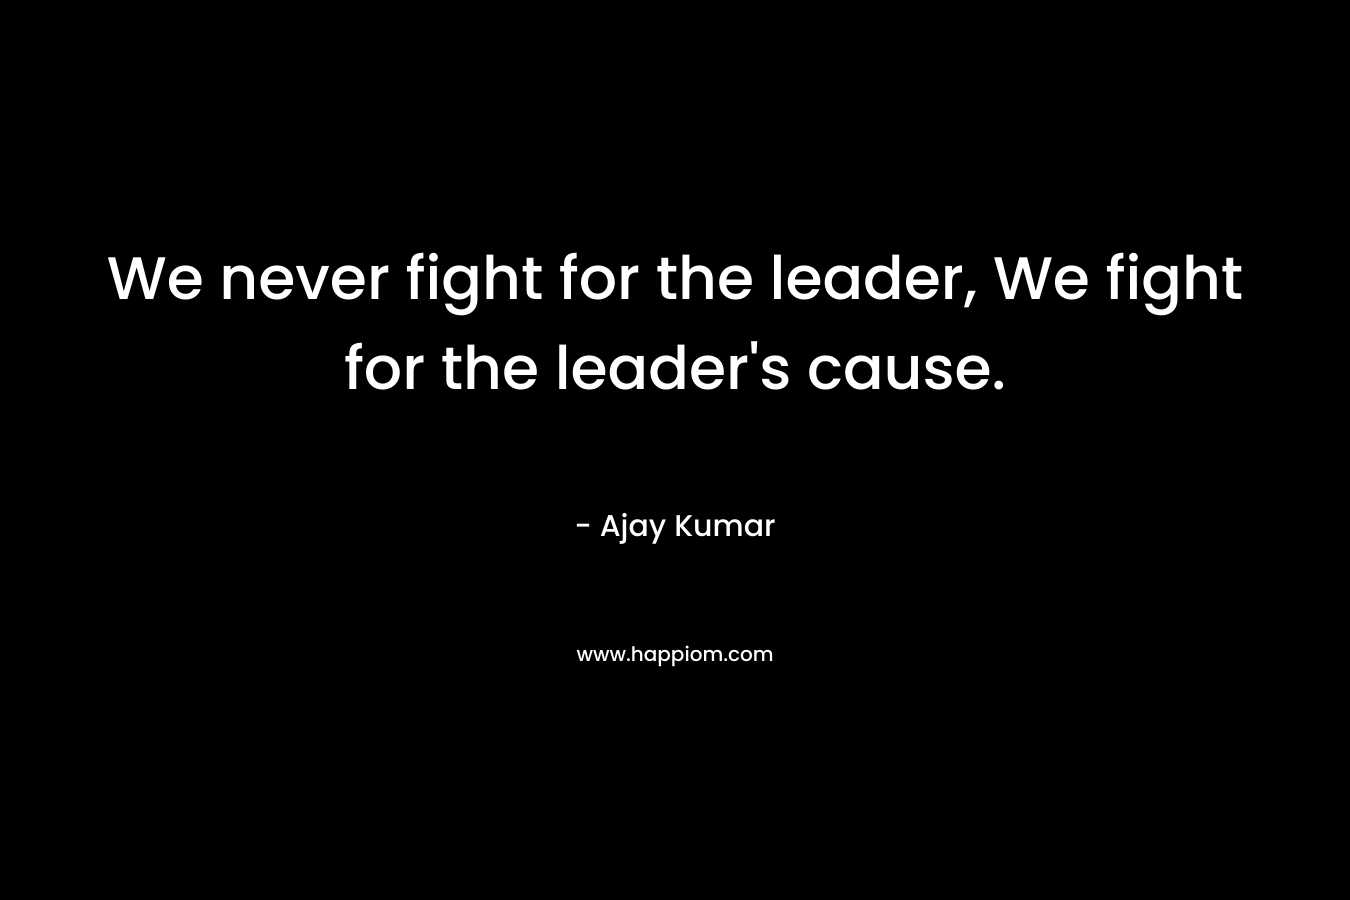 We never fight for the leader, We fight for the leader's cause.